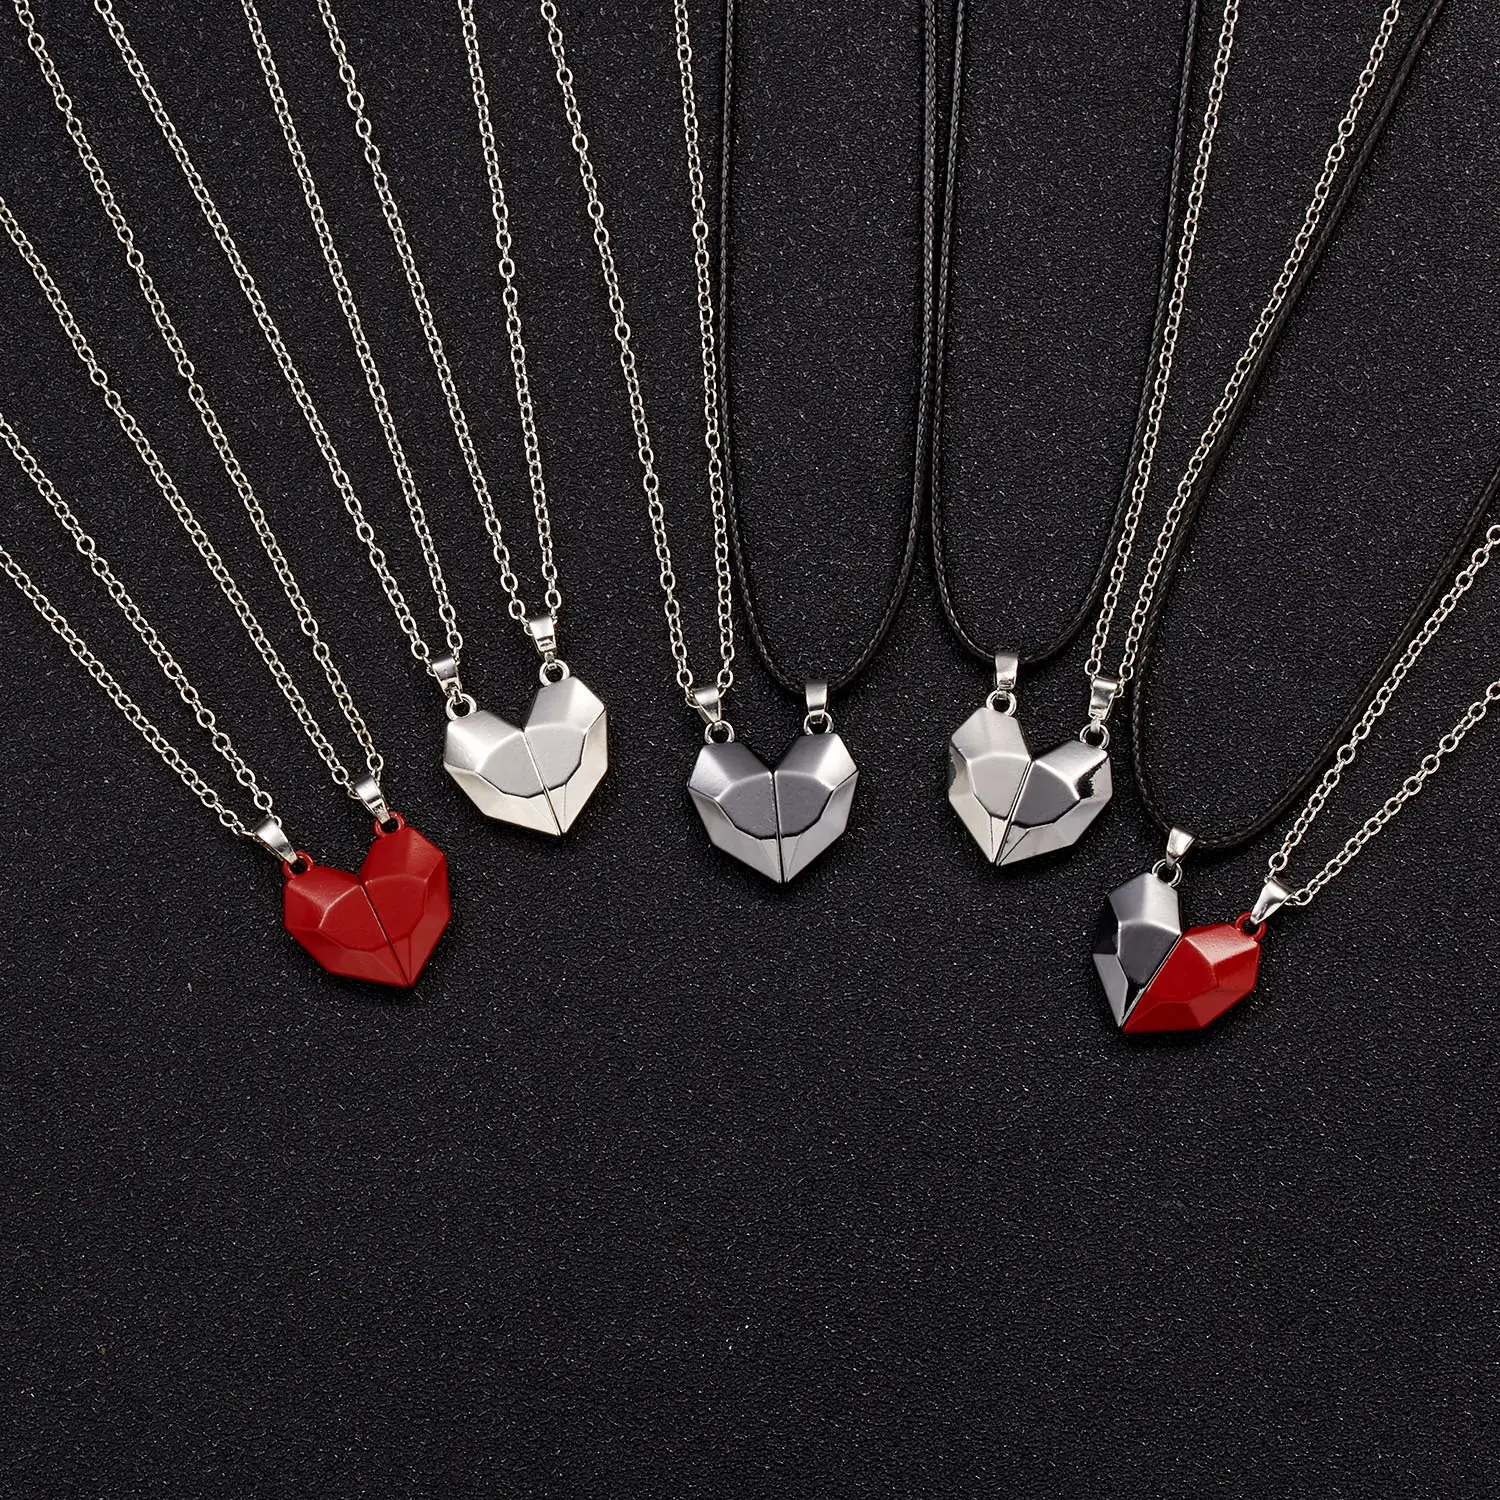 New Design Love Heart Magnetic Pendant Couple Necklace Jewelry